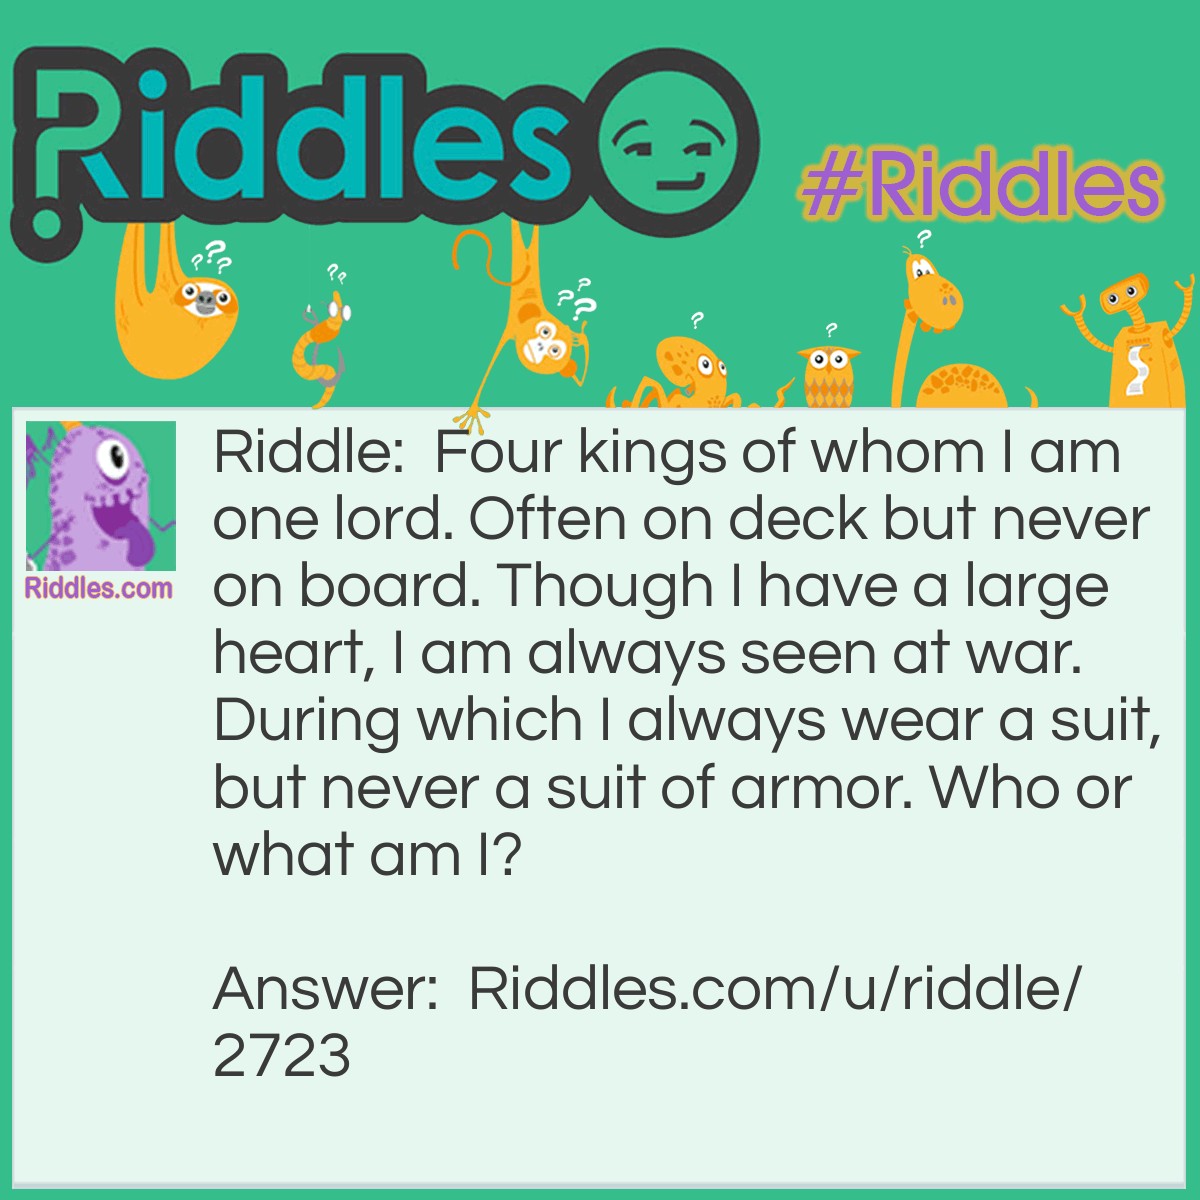 Riddle: Four kings of whom I am one lord. Often on deck but never on board. Though I have a large heart, I am always seen at war. During which I always wear a suit, but never a suit of armor. Who or what am I? Answer: The king of hearts.